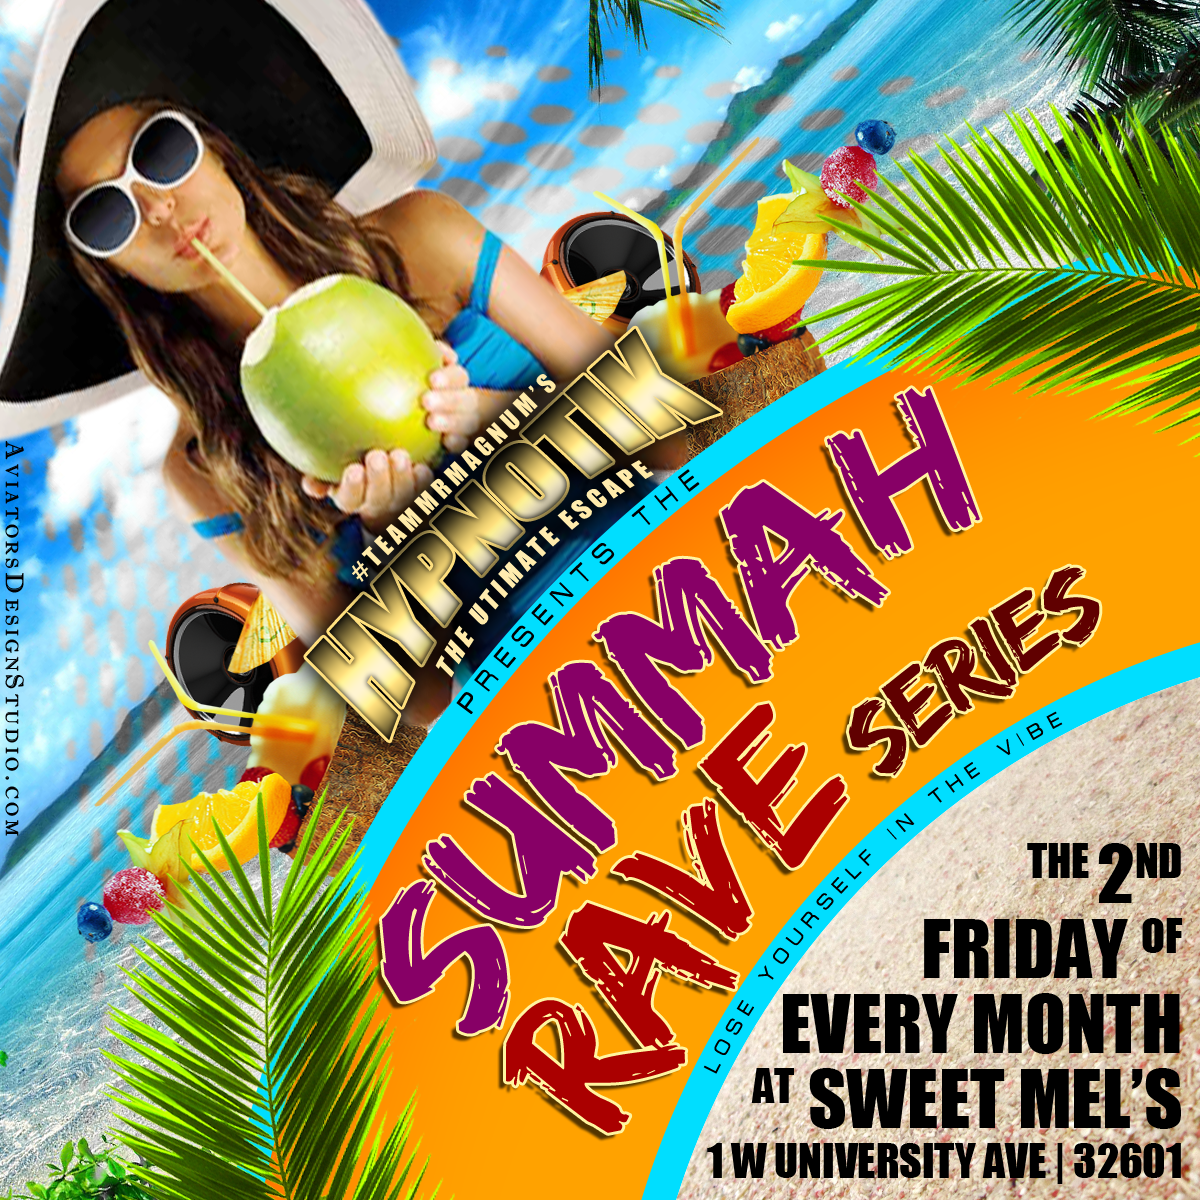 Hypnotik - The Ultimate Escape - Gainesville's Monthly Caribbean Party Ritual - The Summah Rave Series - Featuring Mr. Magnum